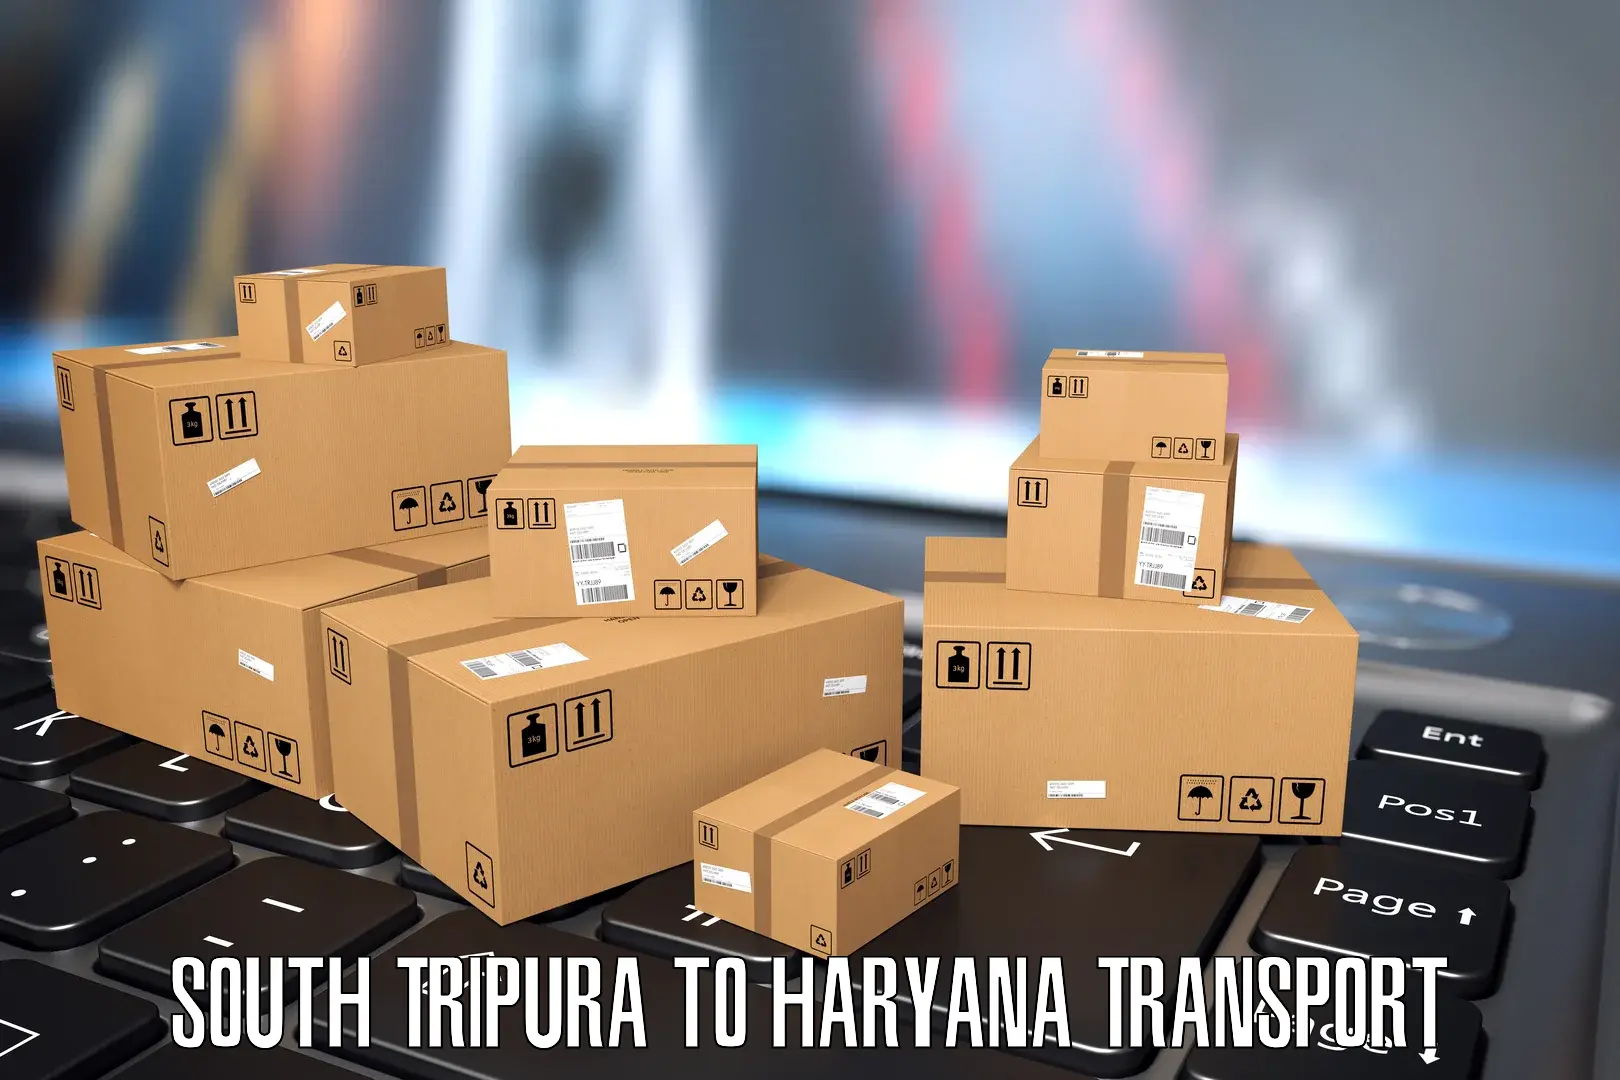 Delivery service South Tripura to Gurugram